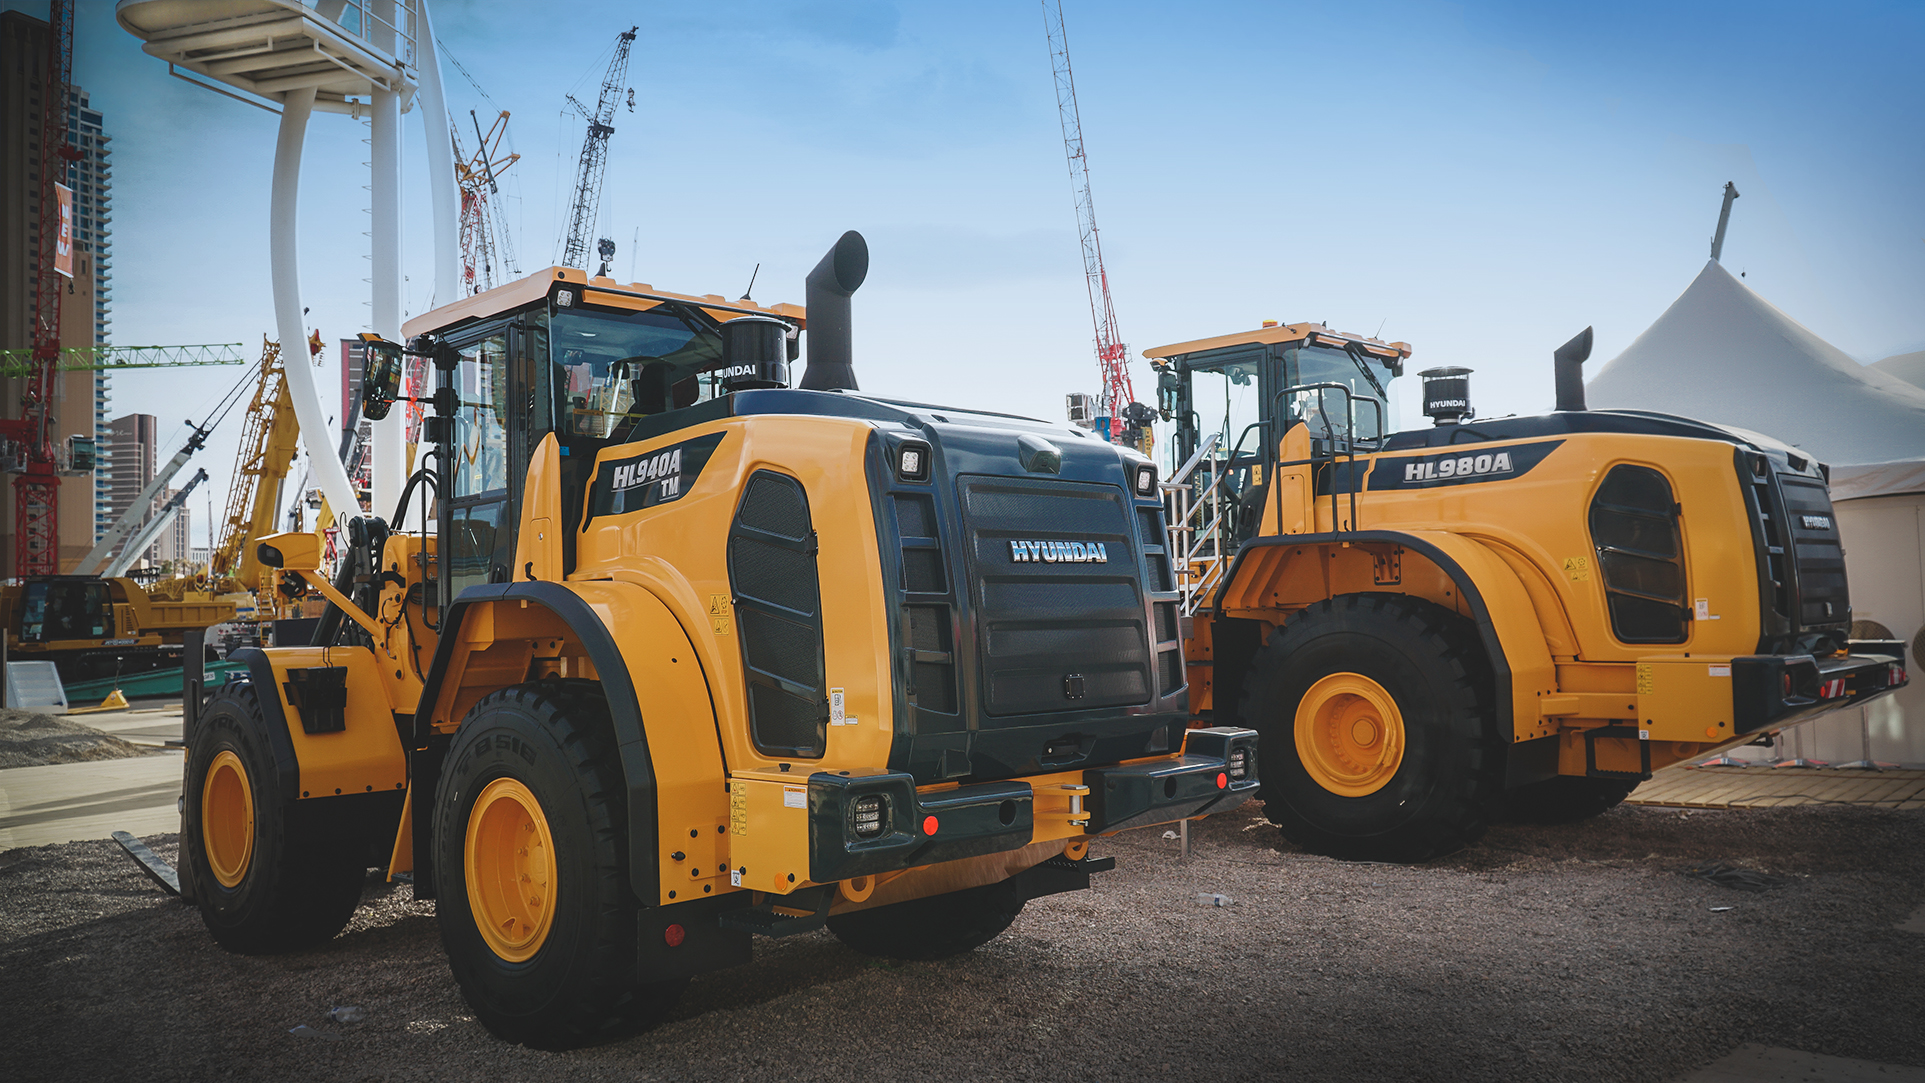 Hyundai Launches A Series Wheel Loaders, Introduces Smaller HL930A, Adds CVT to HL975 Model At ConExpo-Con/Agg